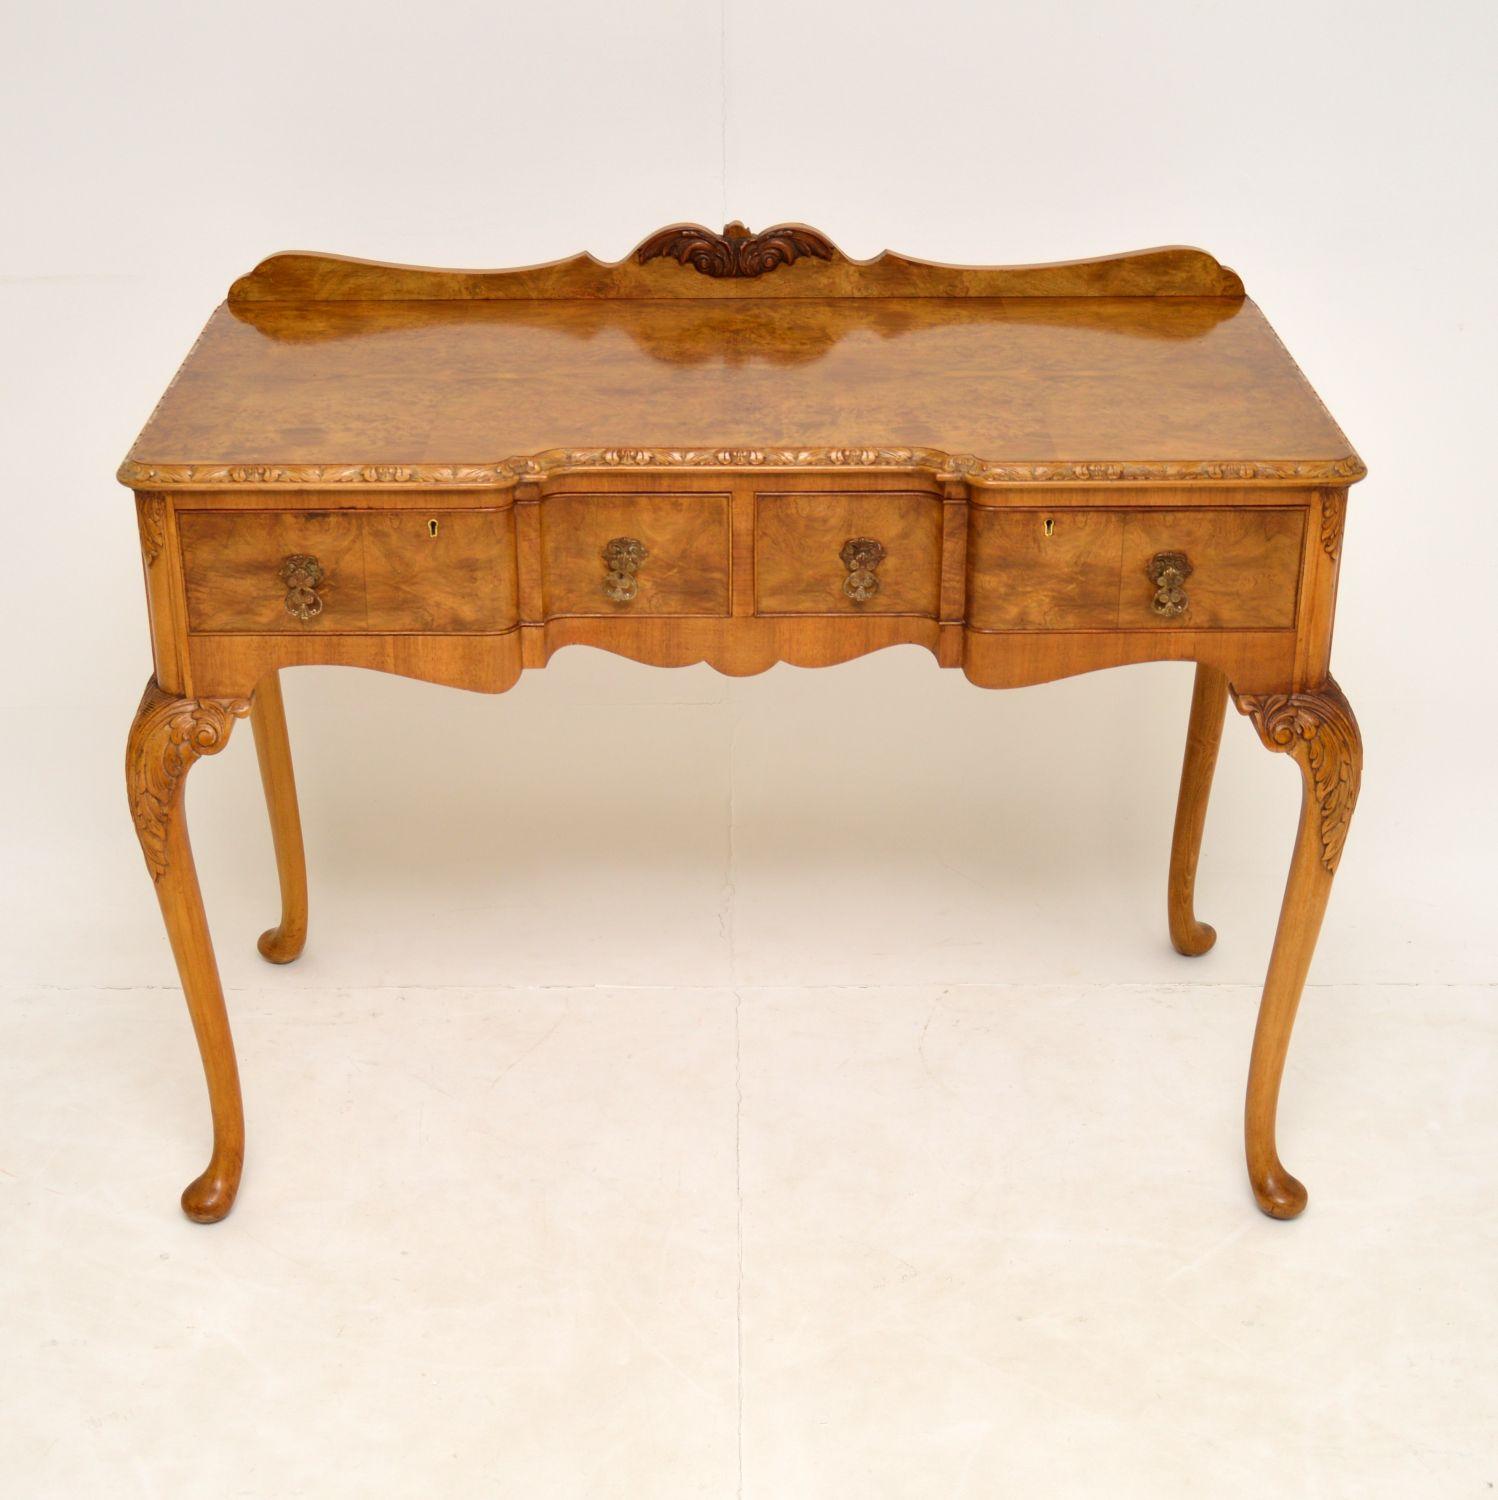 A gorgeous antique server side table in walnut, made in the Queen Anne style. This dates from the 1920-30’s, it was made in England by Epstein.

The quality is amazing, with stunning grain patterns and lovely carving around the edges. This